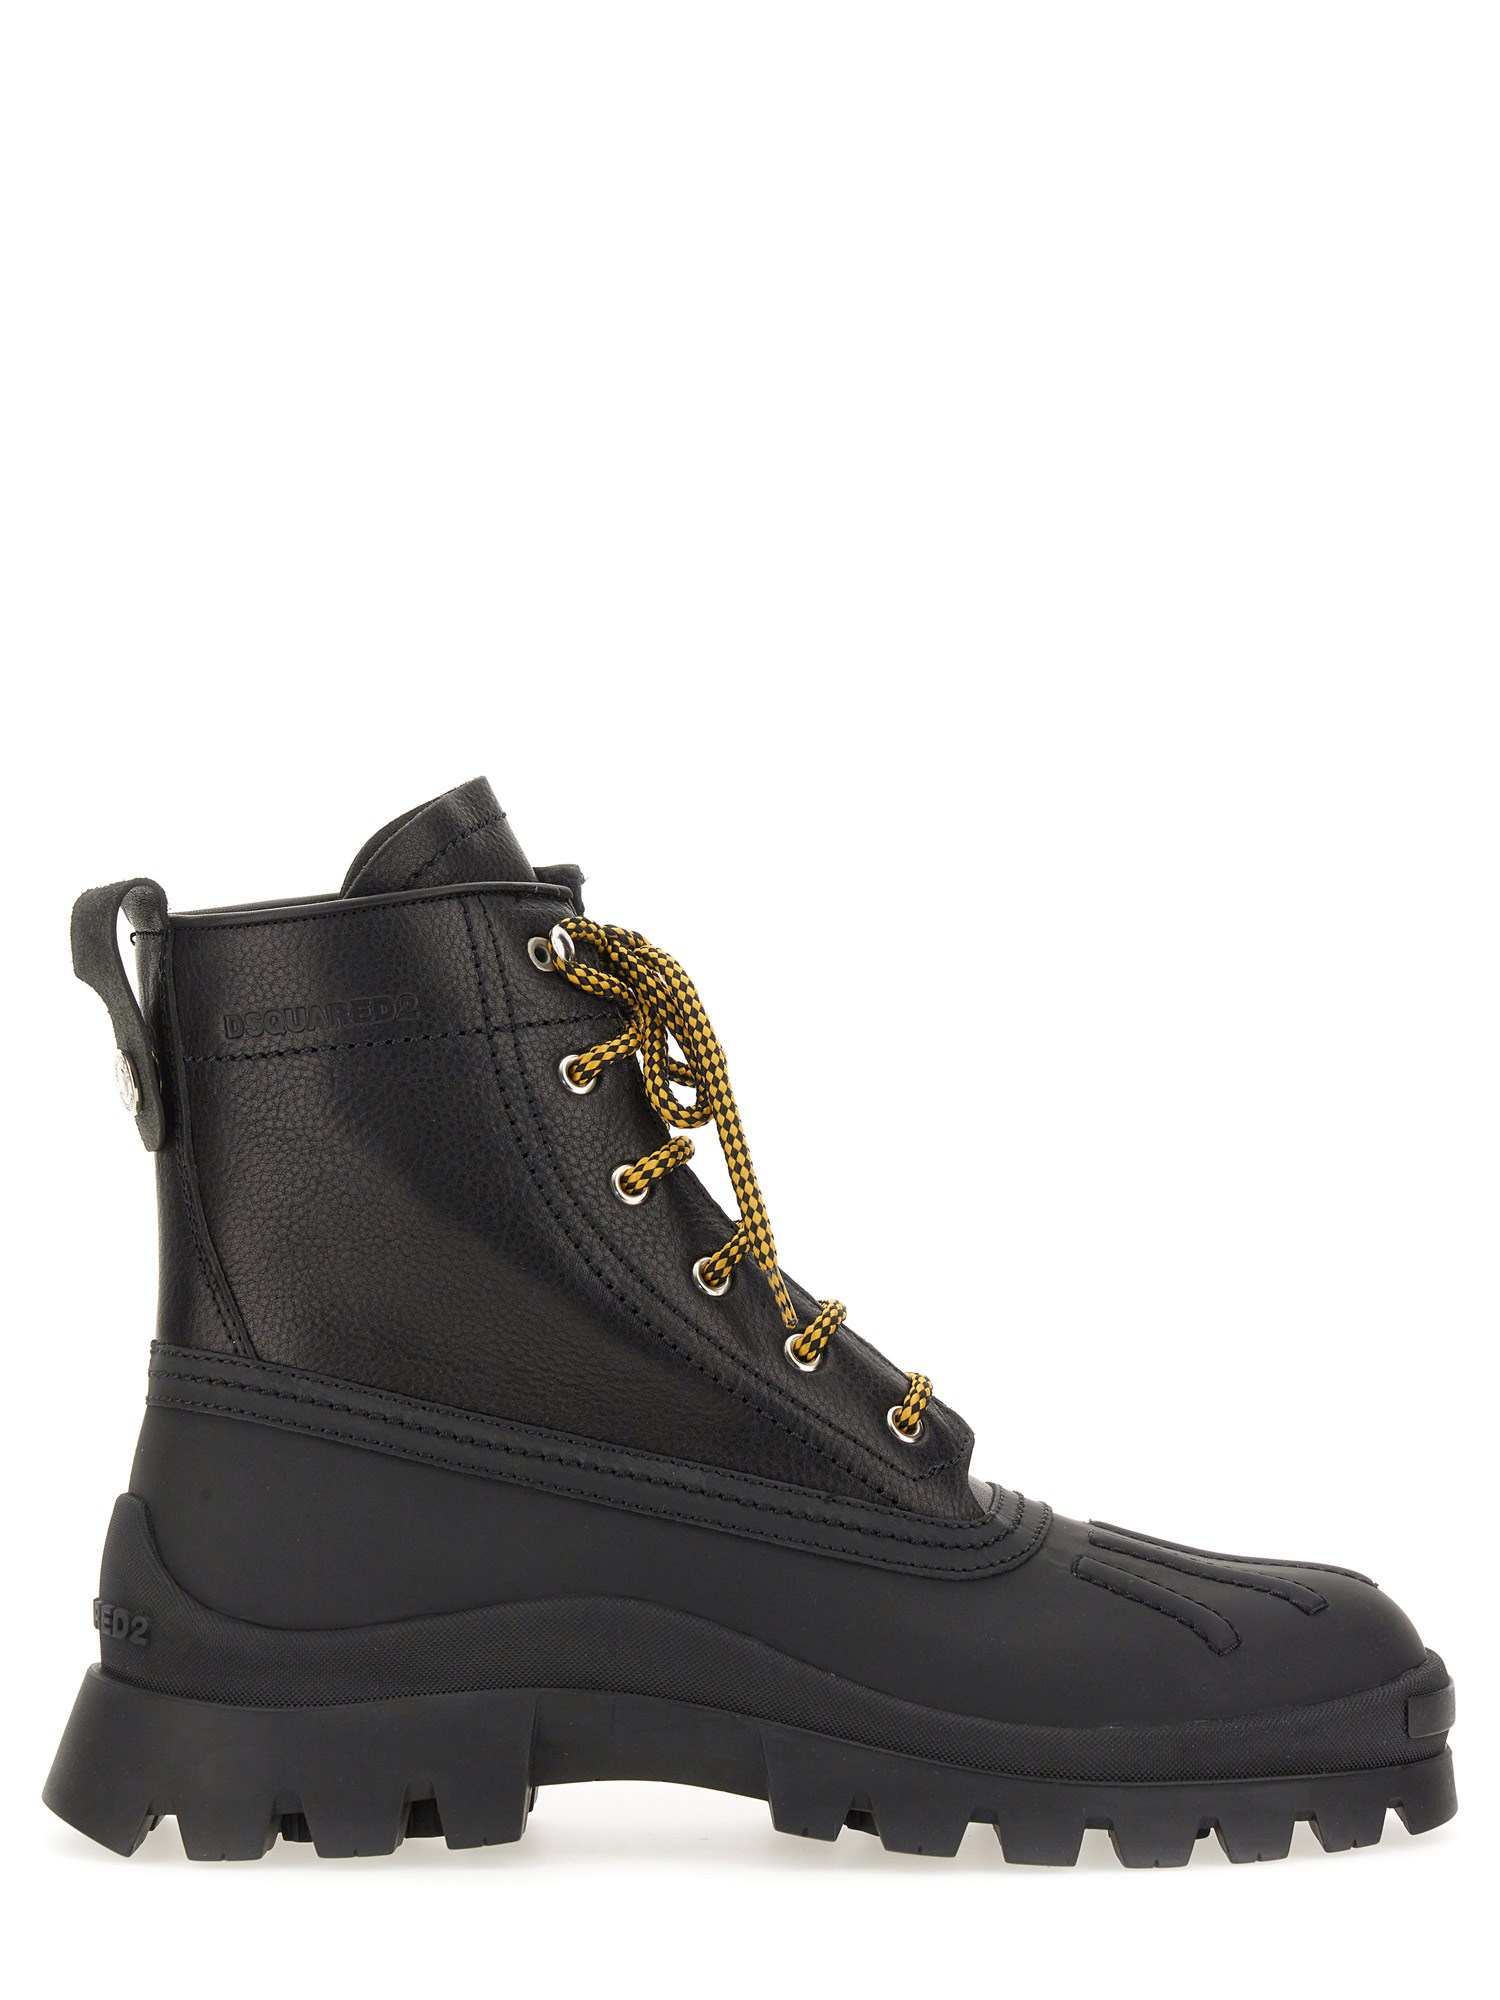 dsquared boot canadian